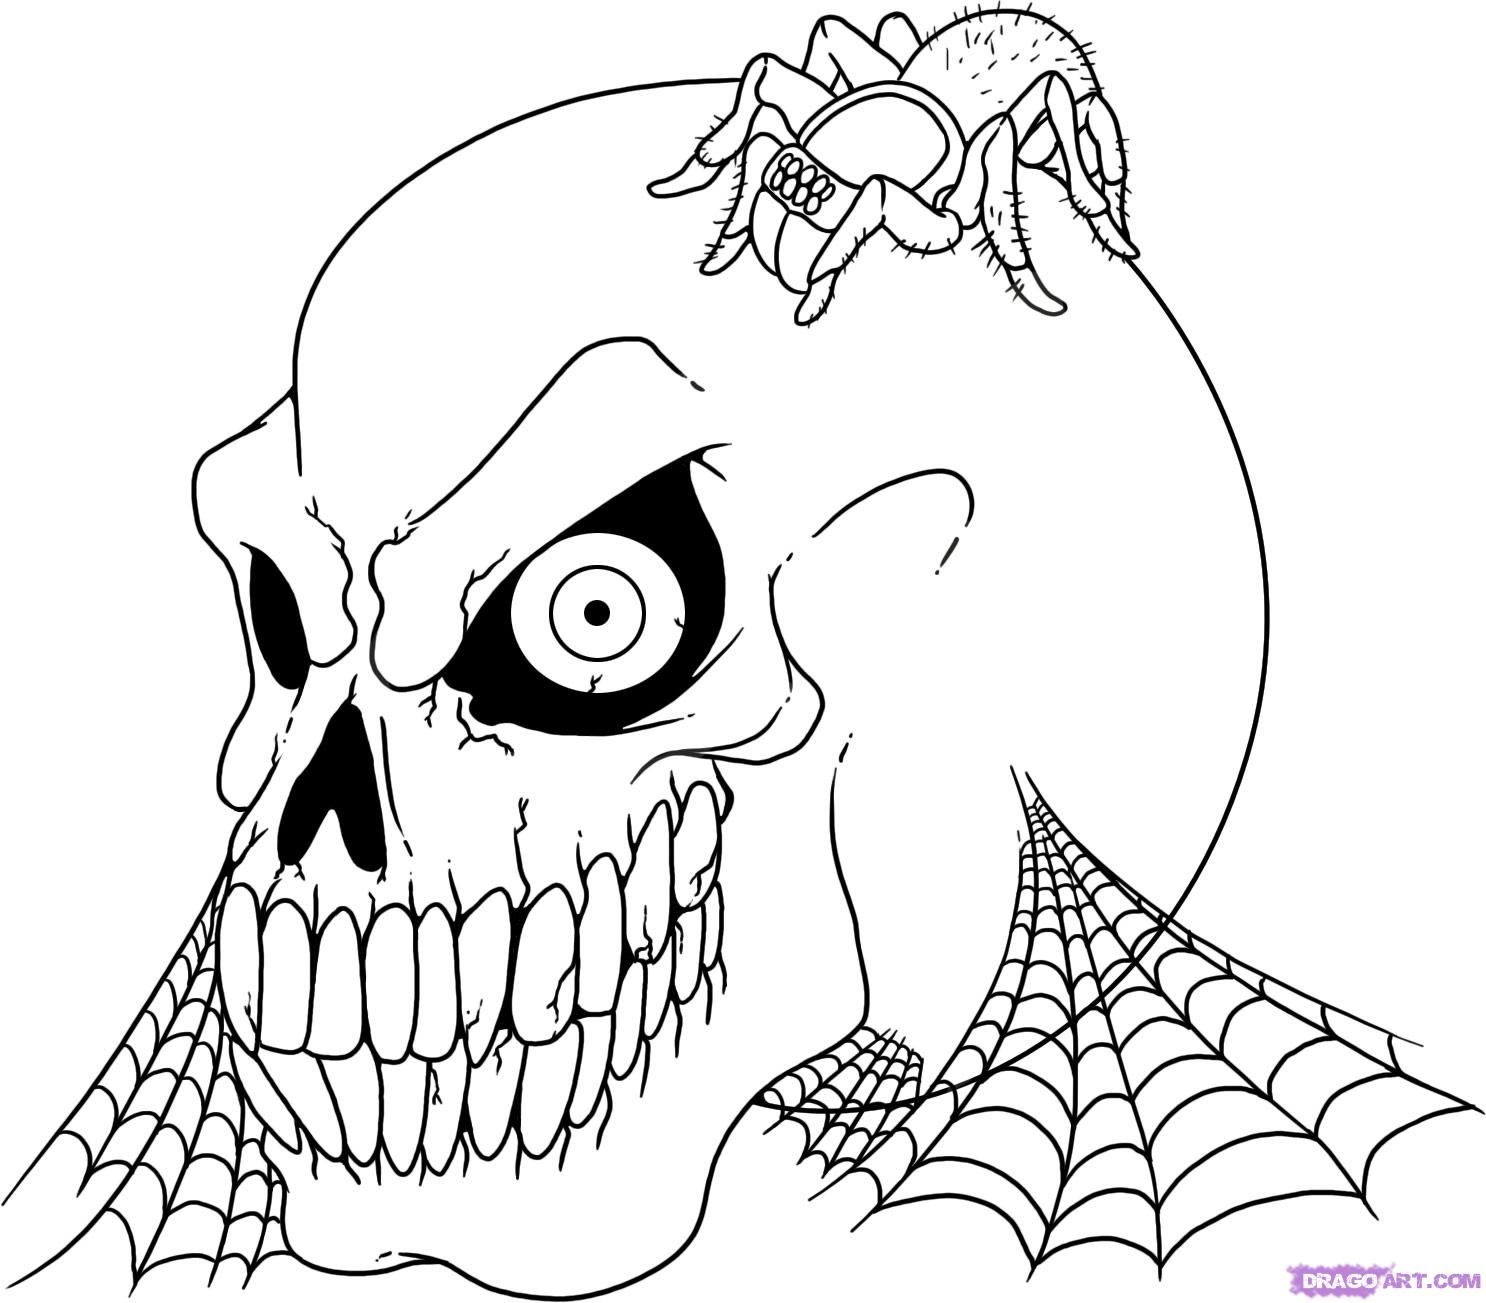 Skull coloring pages halloween coloring pages printable halloween coloring pages